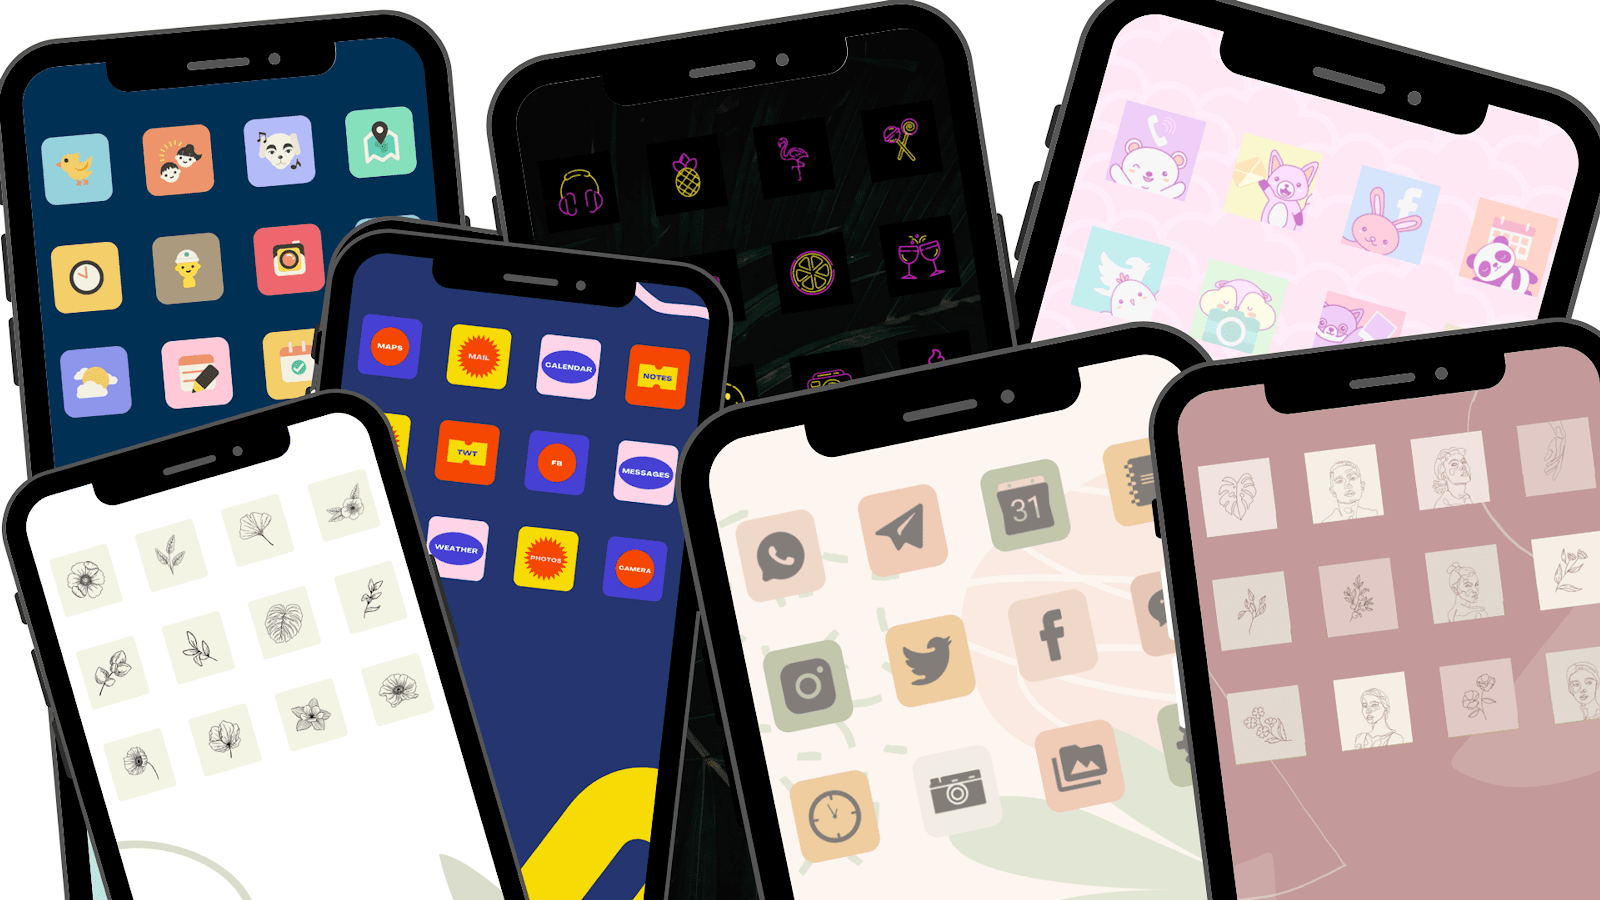 Learn How to Change App Icons on a Cell Phone